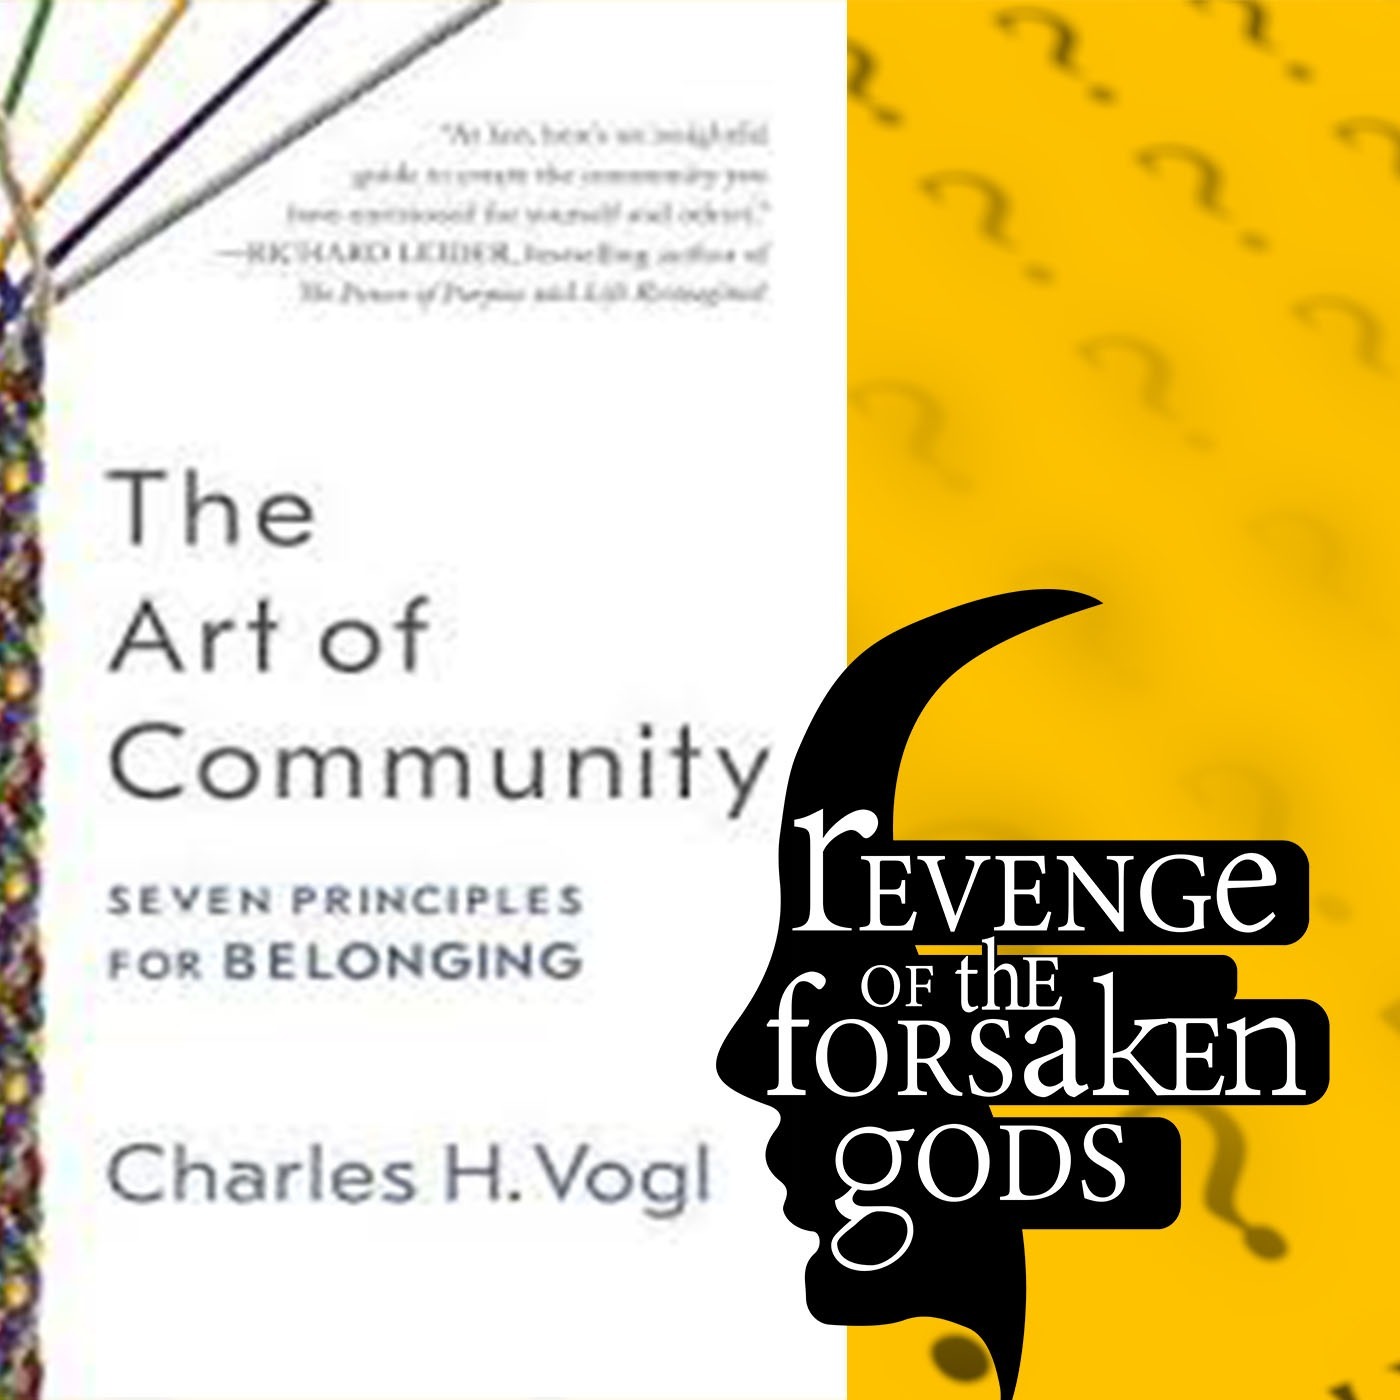 RFG03 | The Art of Community by Charles H. Vogl Book Review